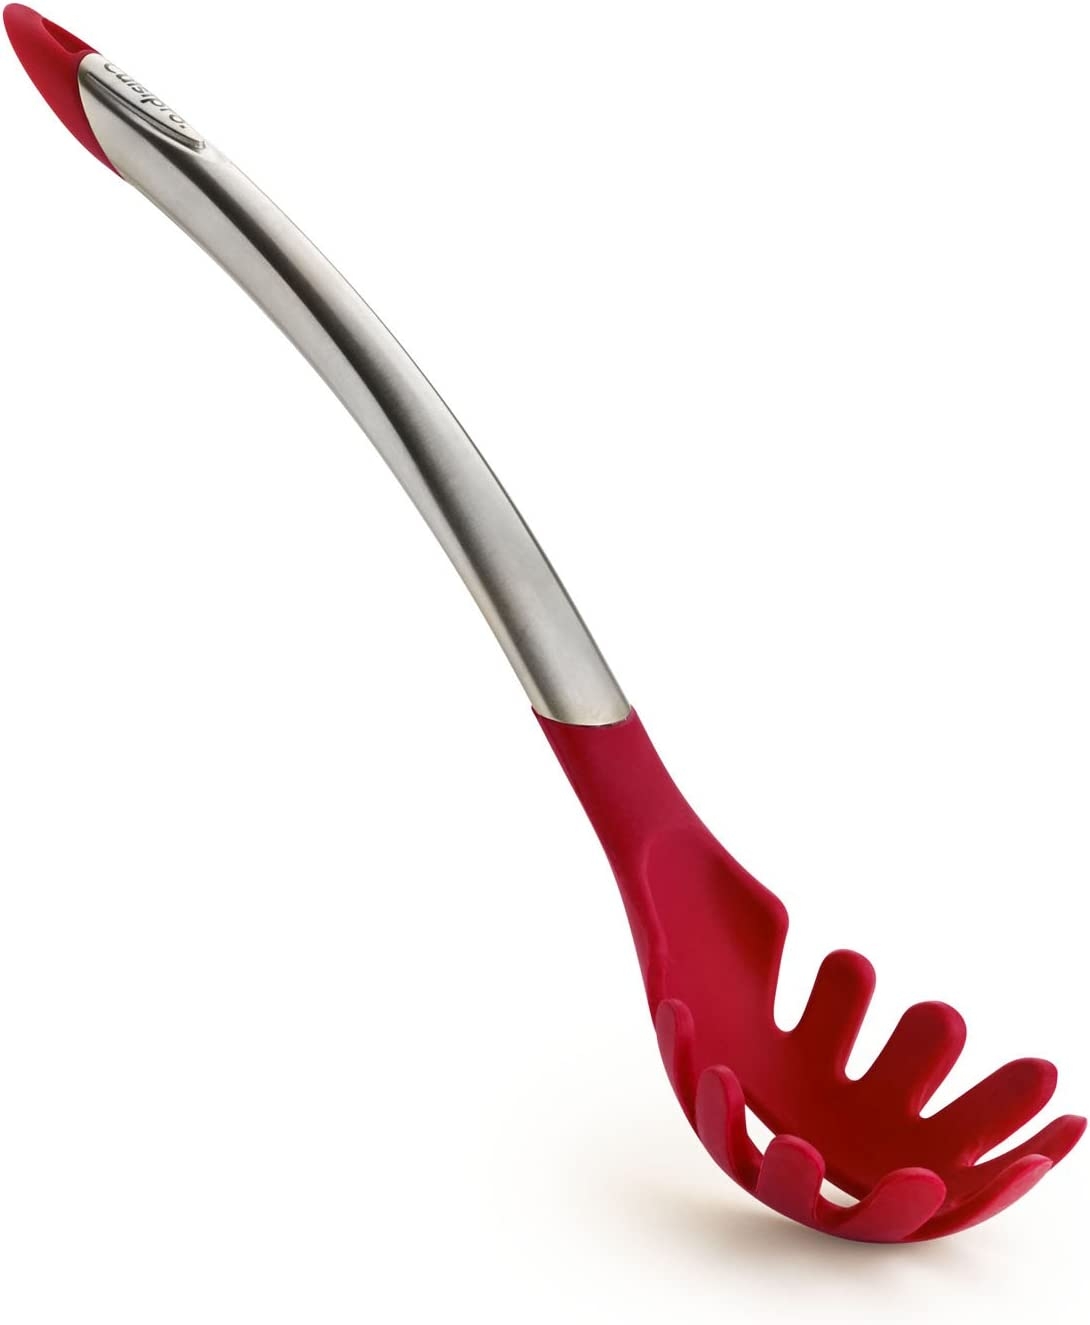 Cuisipro Spagetti Spaghetti Server, 12.25-Inch, Red Import To Shop ×Product customization General Description Gallery Reviews